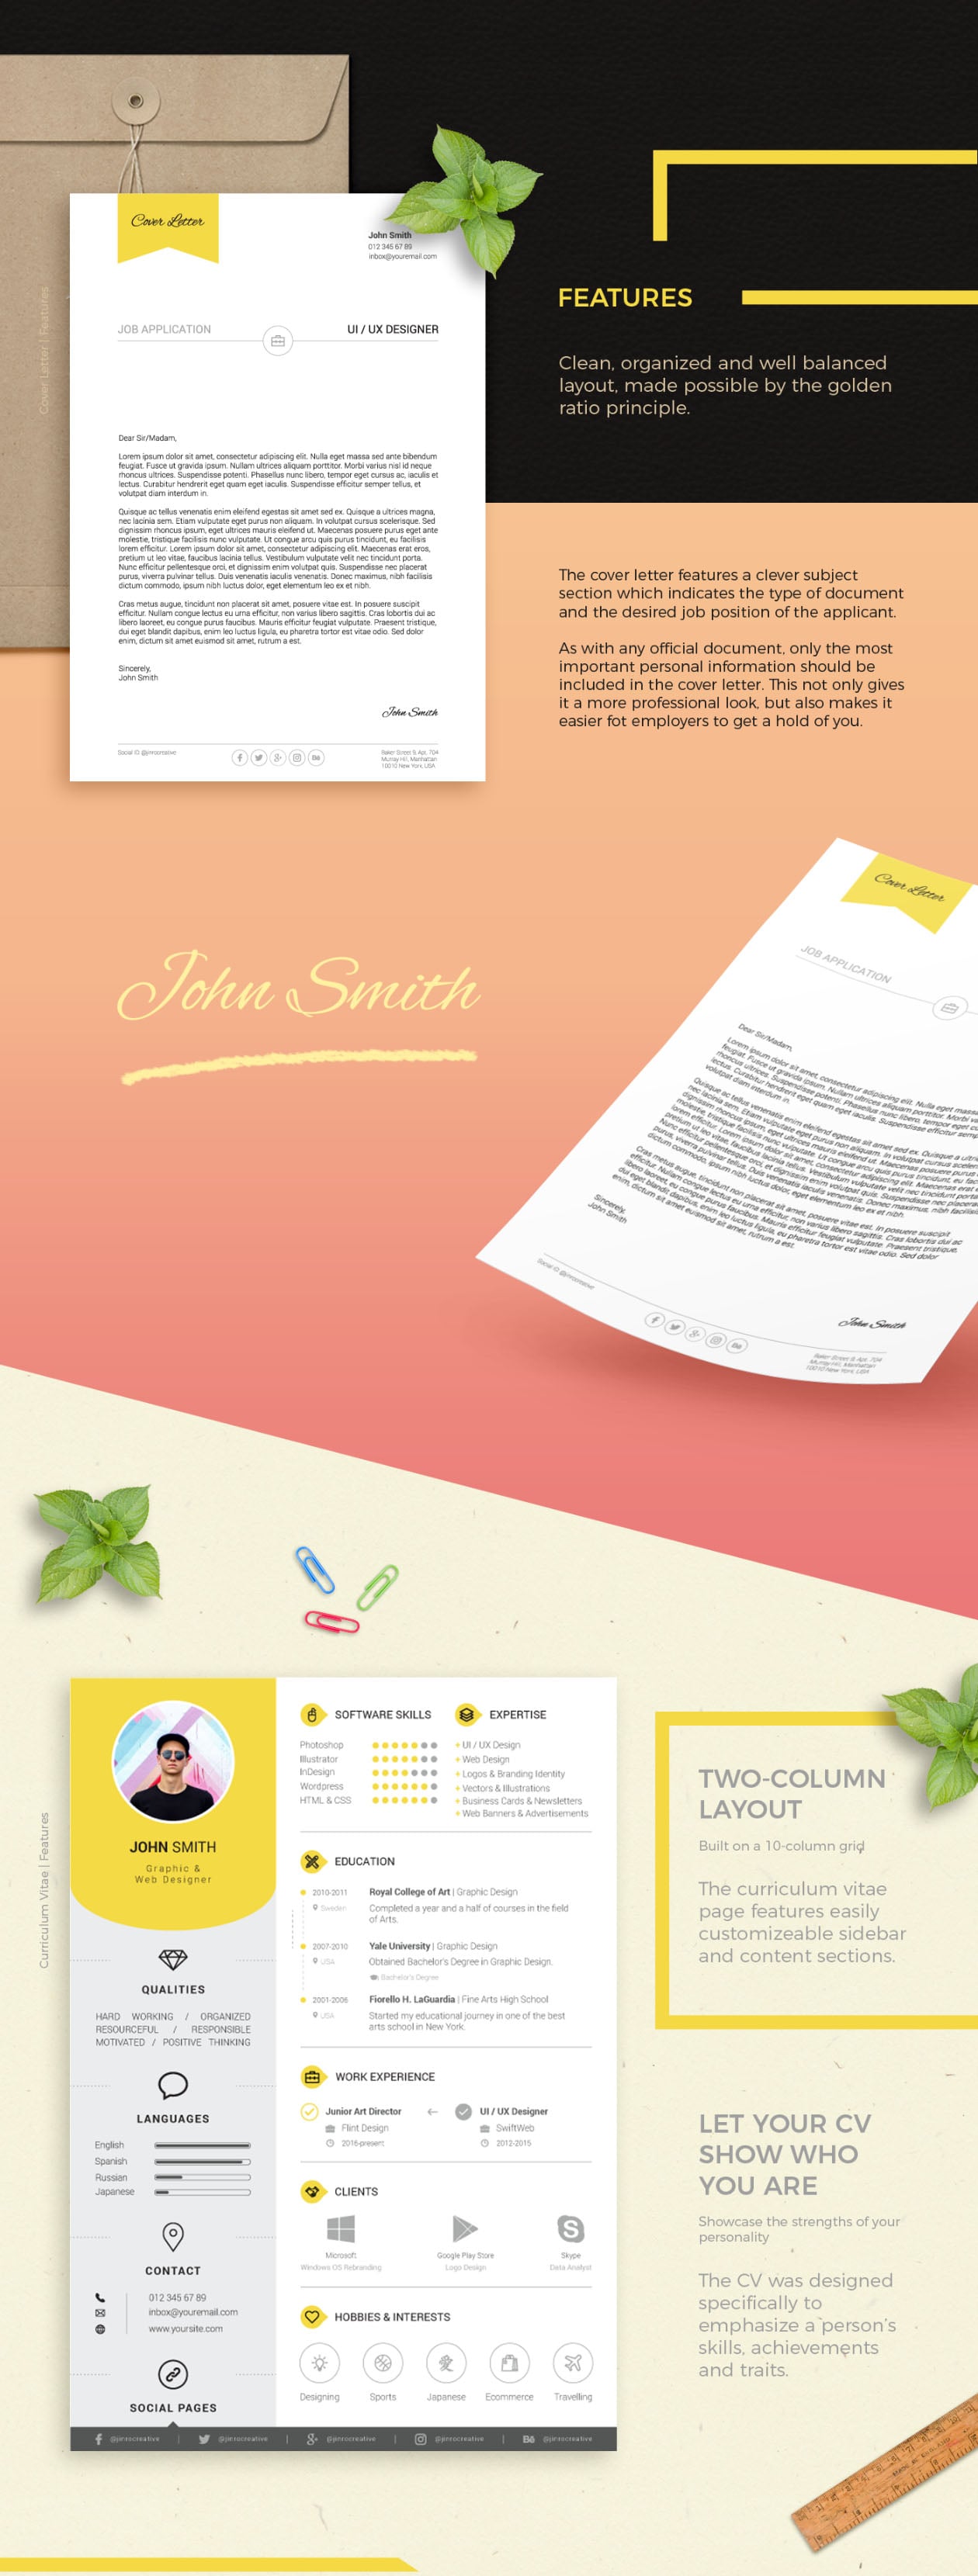 Resume and Cover Letter Print Templates